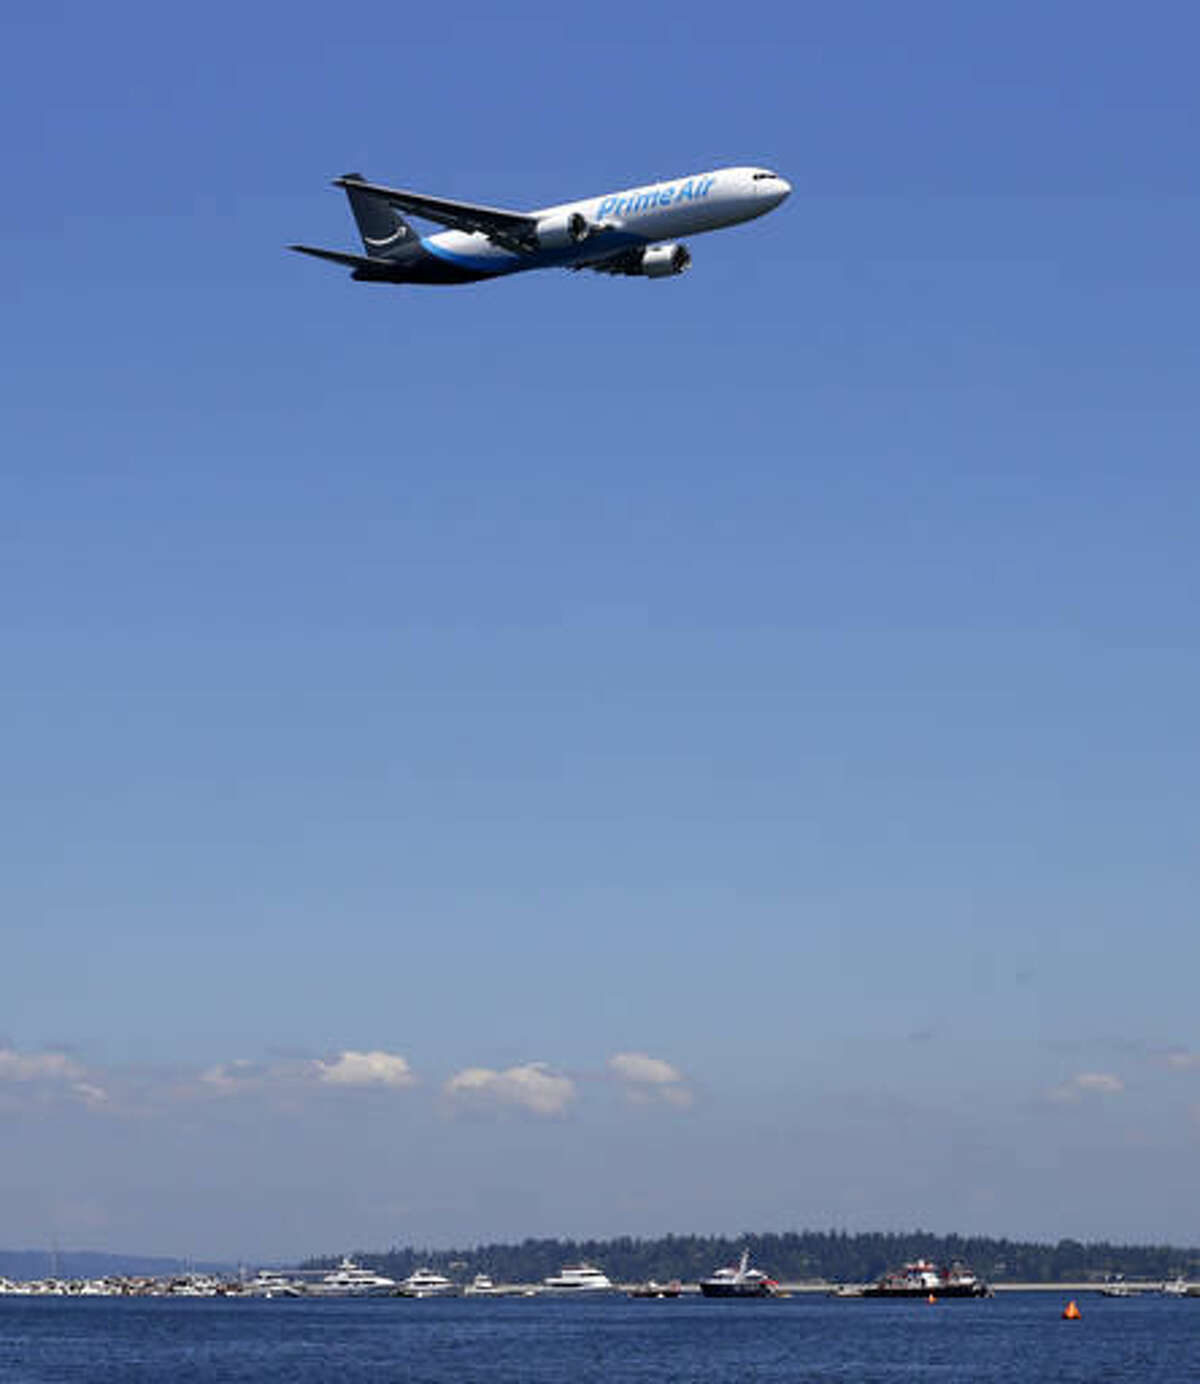 A Boeing 767 with an Amazon.com "Prime Air" livery flies over Lake Washington, Friday, Aug. 5, 2016, as part of the Boeing Seafair Air Show. Amazon unveiled its first branded cargo plane Thursday, one of 40 freighters that will make up the company's own air transportation network of 40 Boeing jets leased from Atlas Air and Air Transportation Services Group, which will operate the air cargo network. (AP Photo/Ted S. Warren)